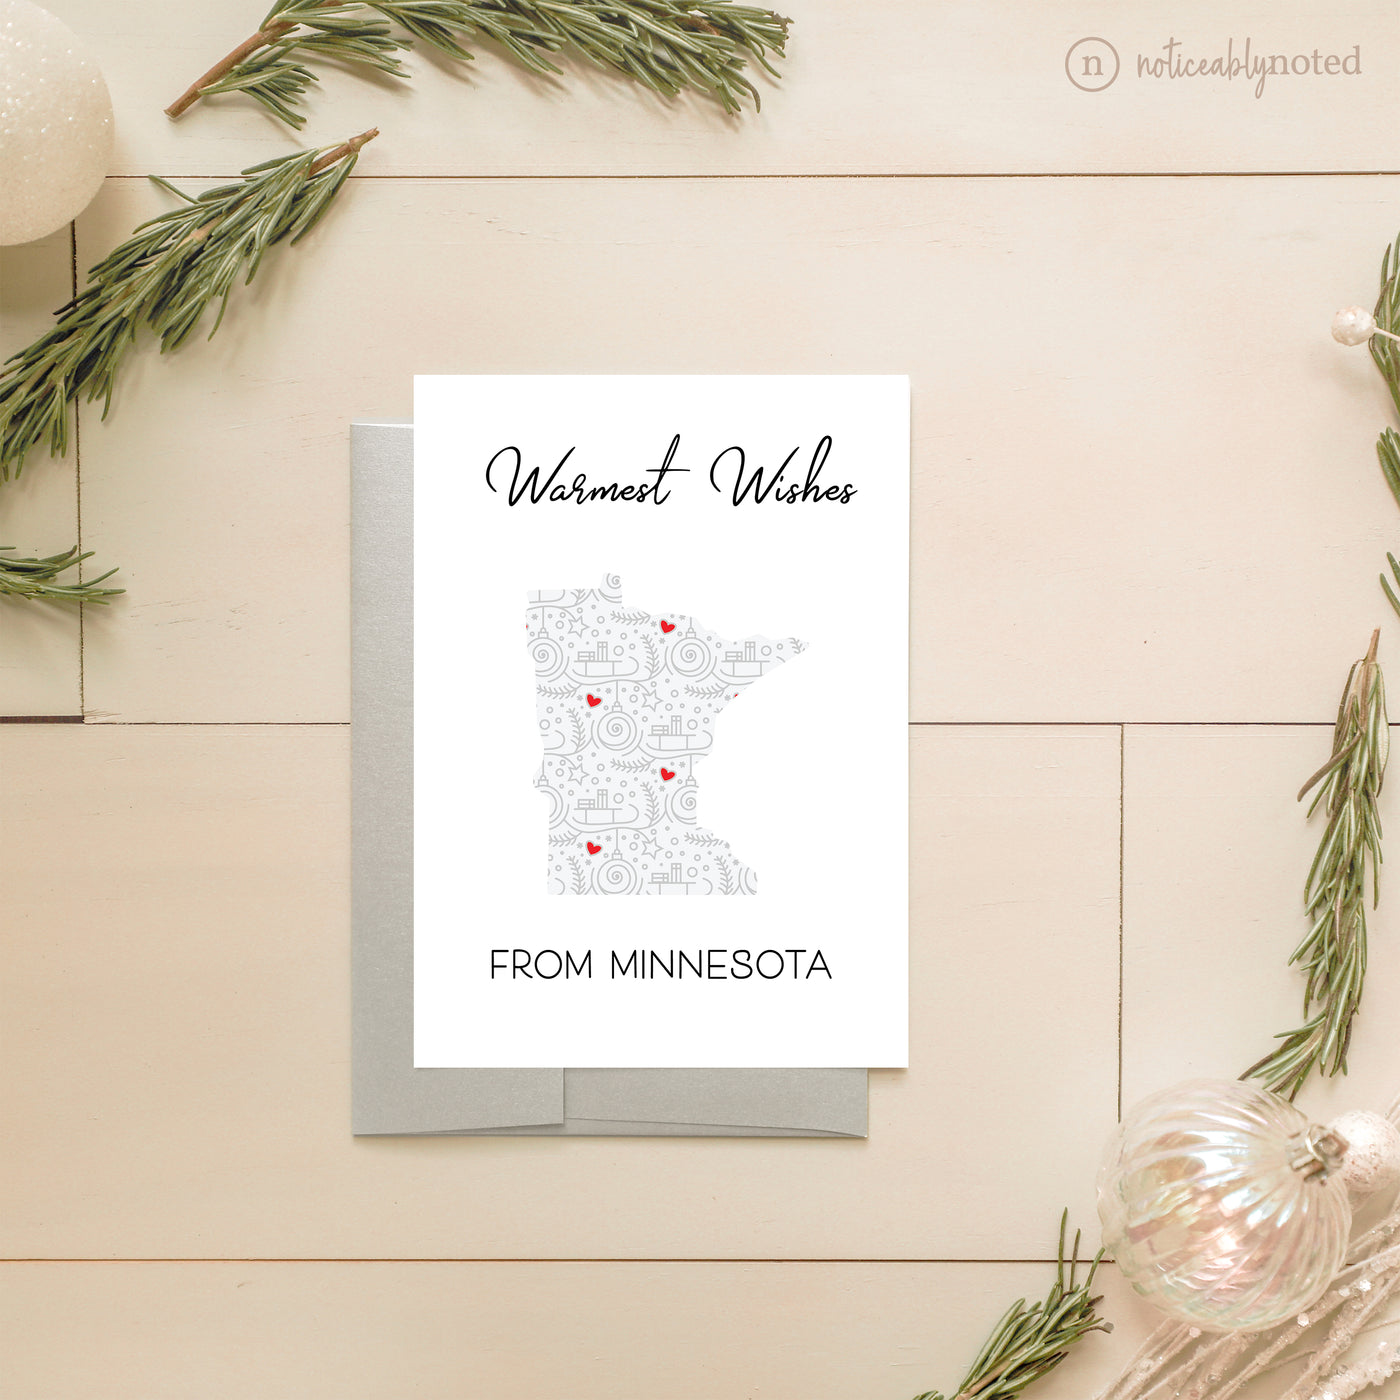 MN Holiday Greeting Cards | Noticeably Noted